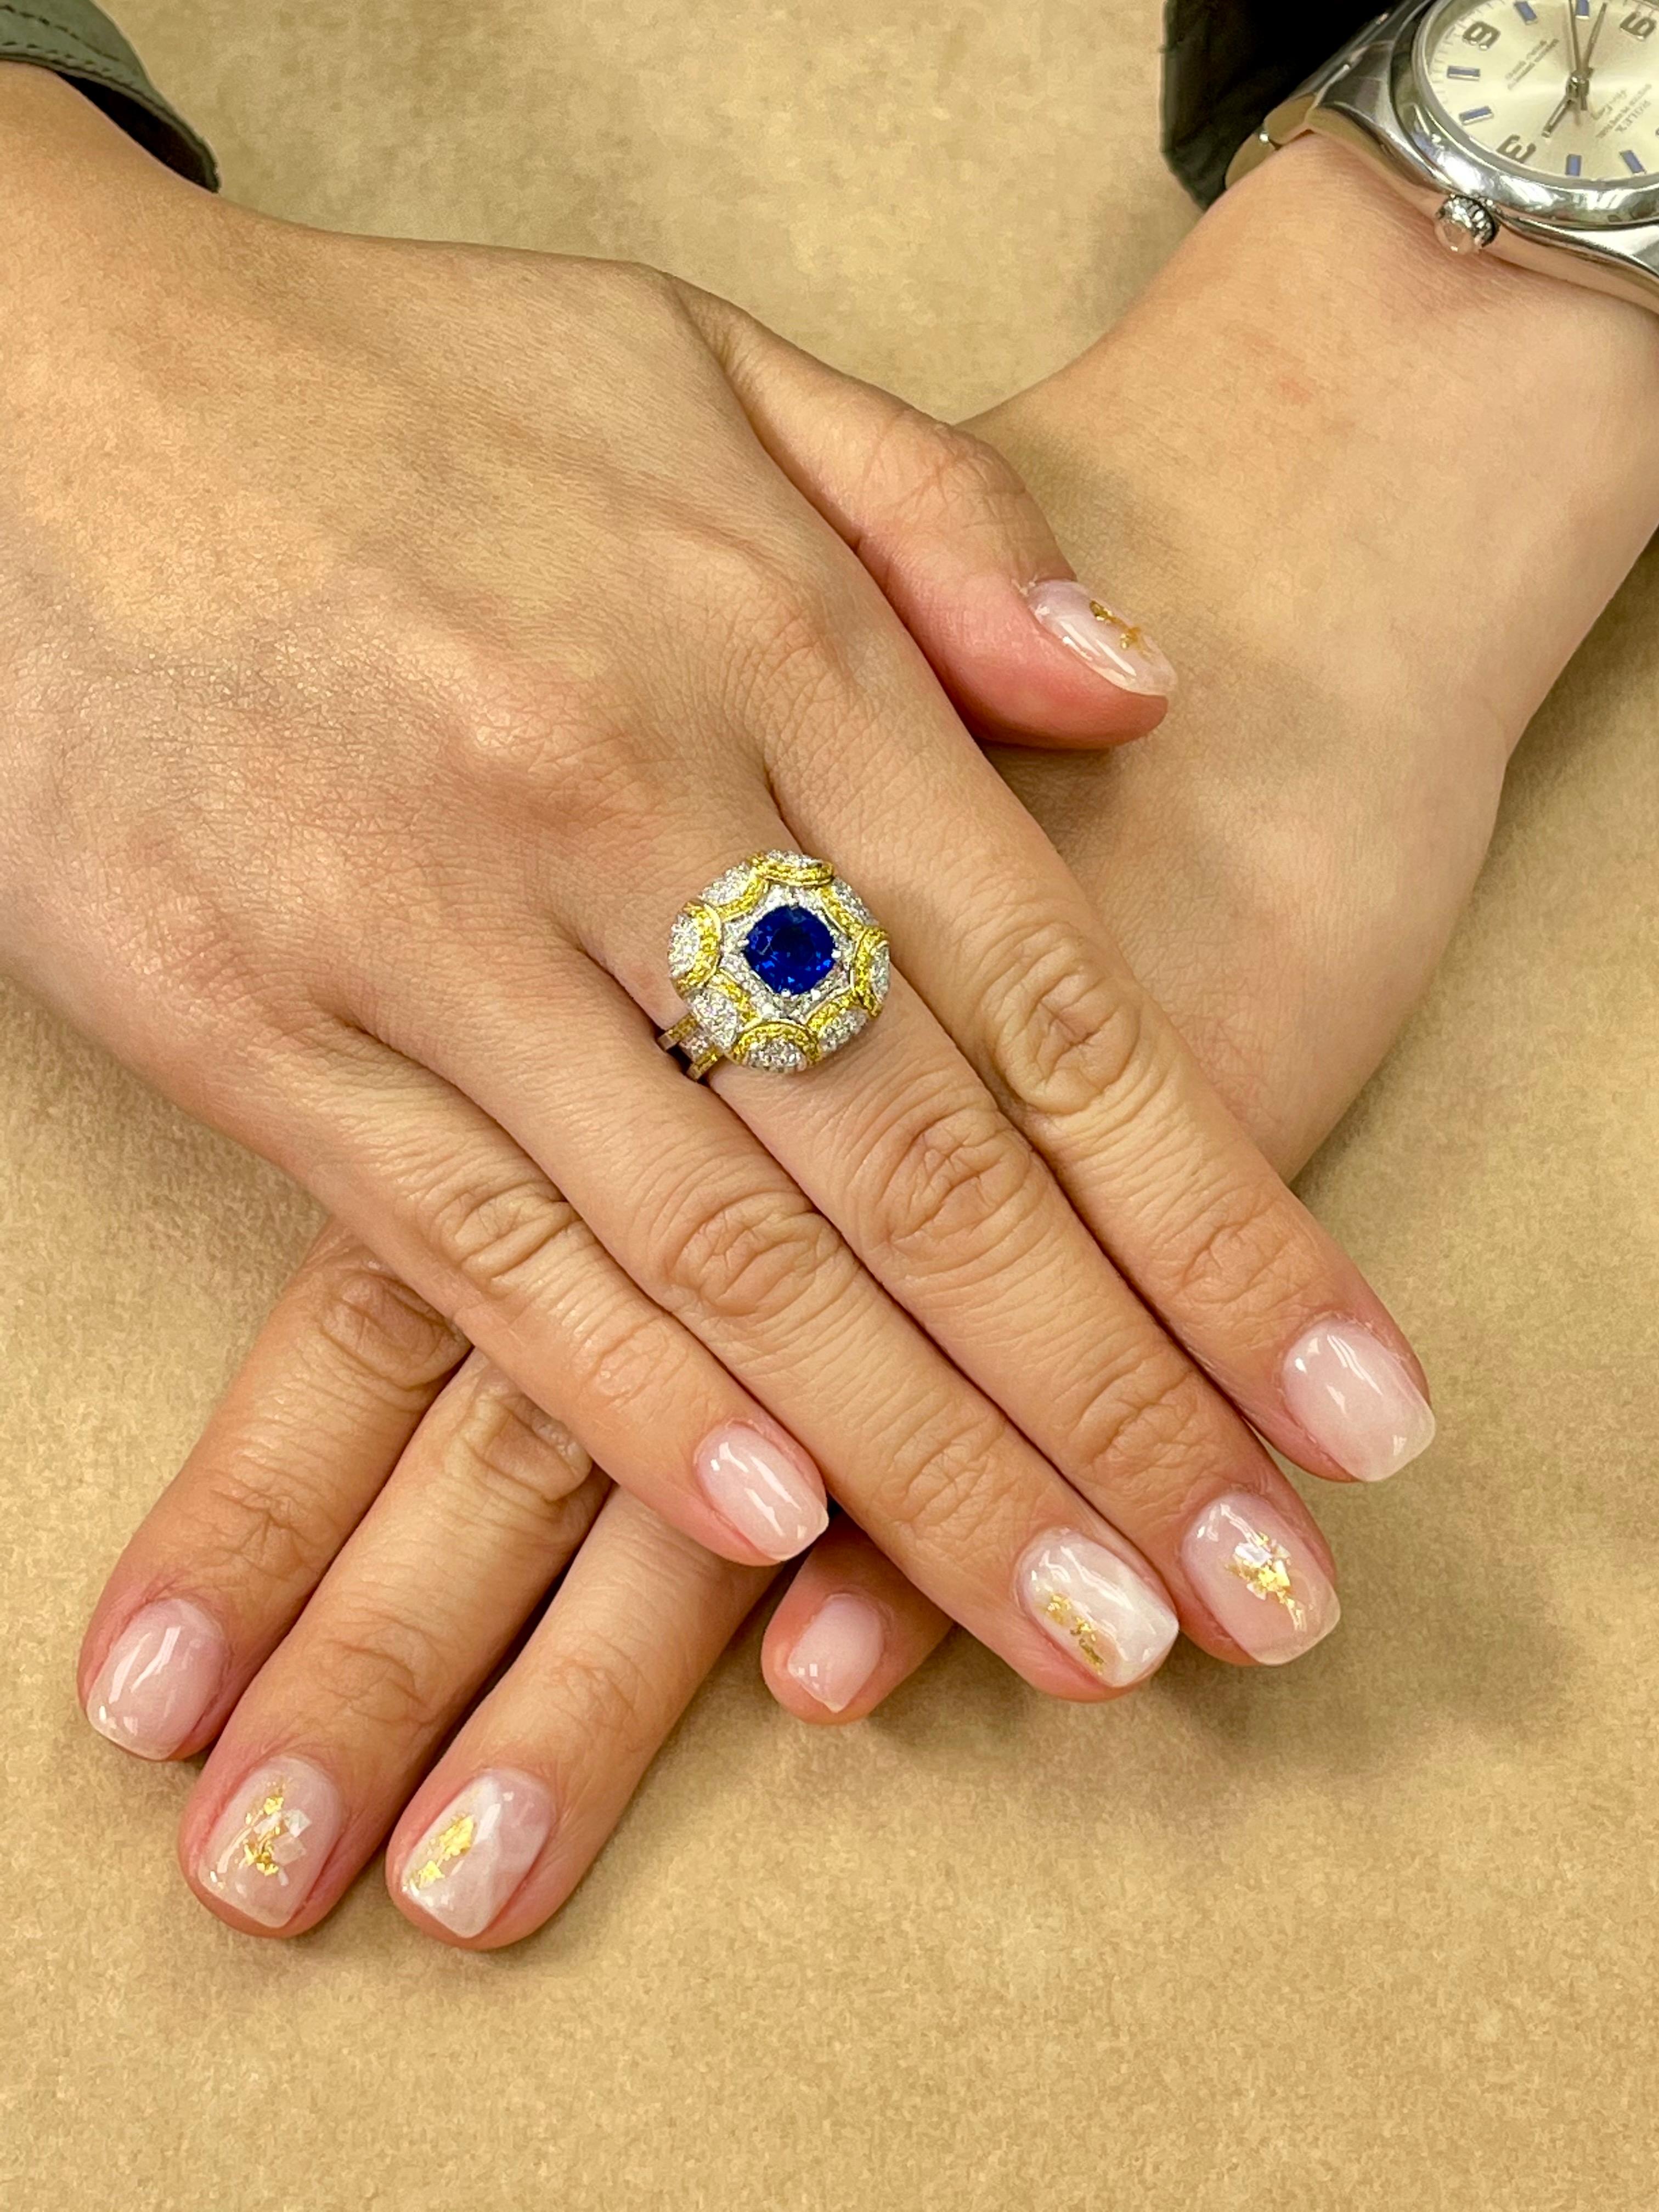 Here is an ICA Gemlab certified Sapphire from Sri Lanka with heat. The ring is set in 18k white gold and diamonds. There are a combination of white and fancy yellow diamonds that make up this setting. We are unable to give you an accurate estimate